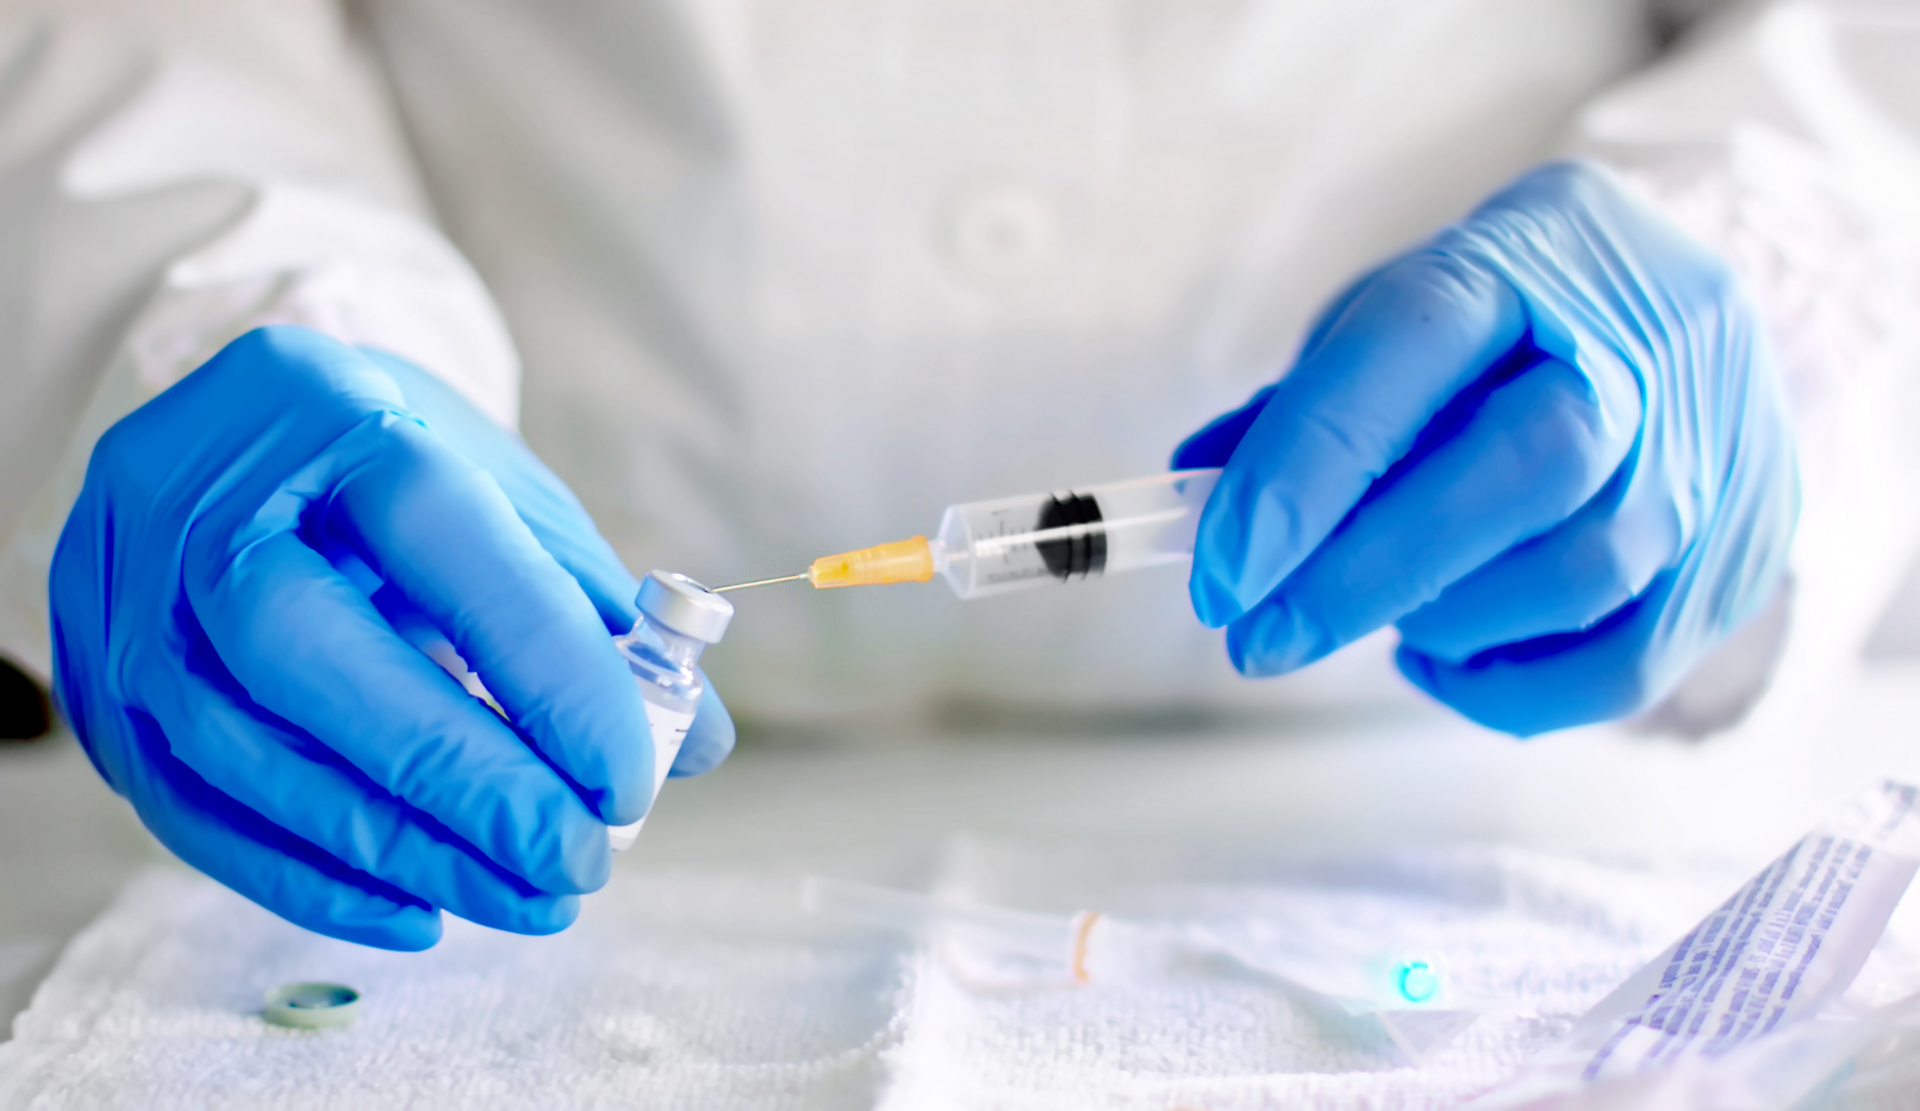 biontech and pfizers covid 19 vaccine trial show positive results